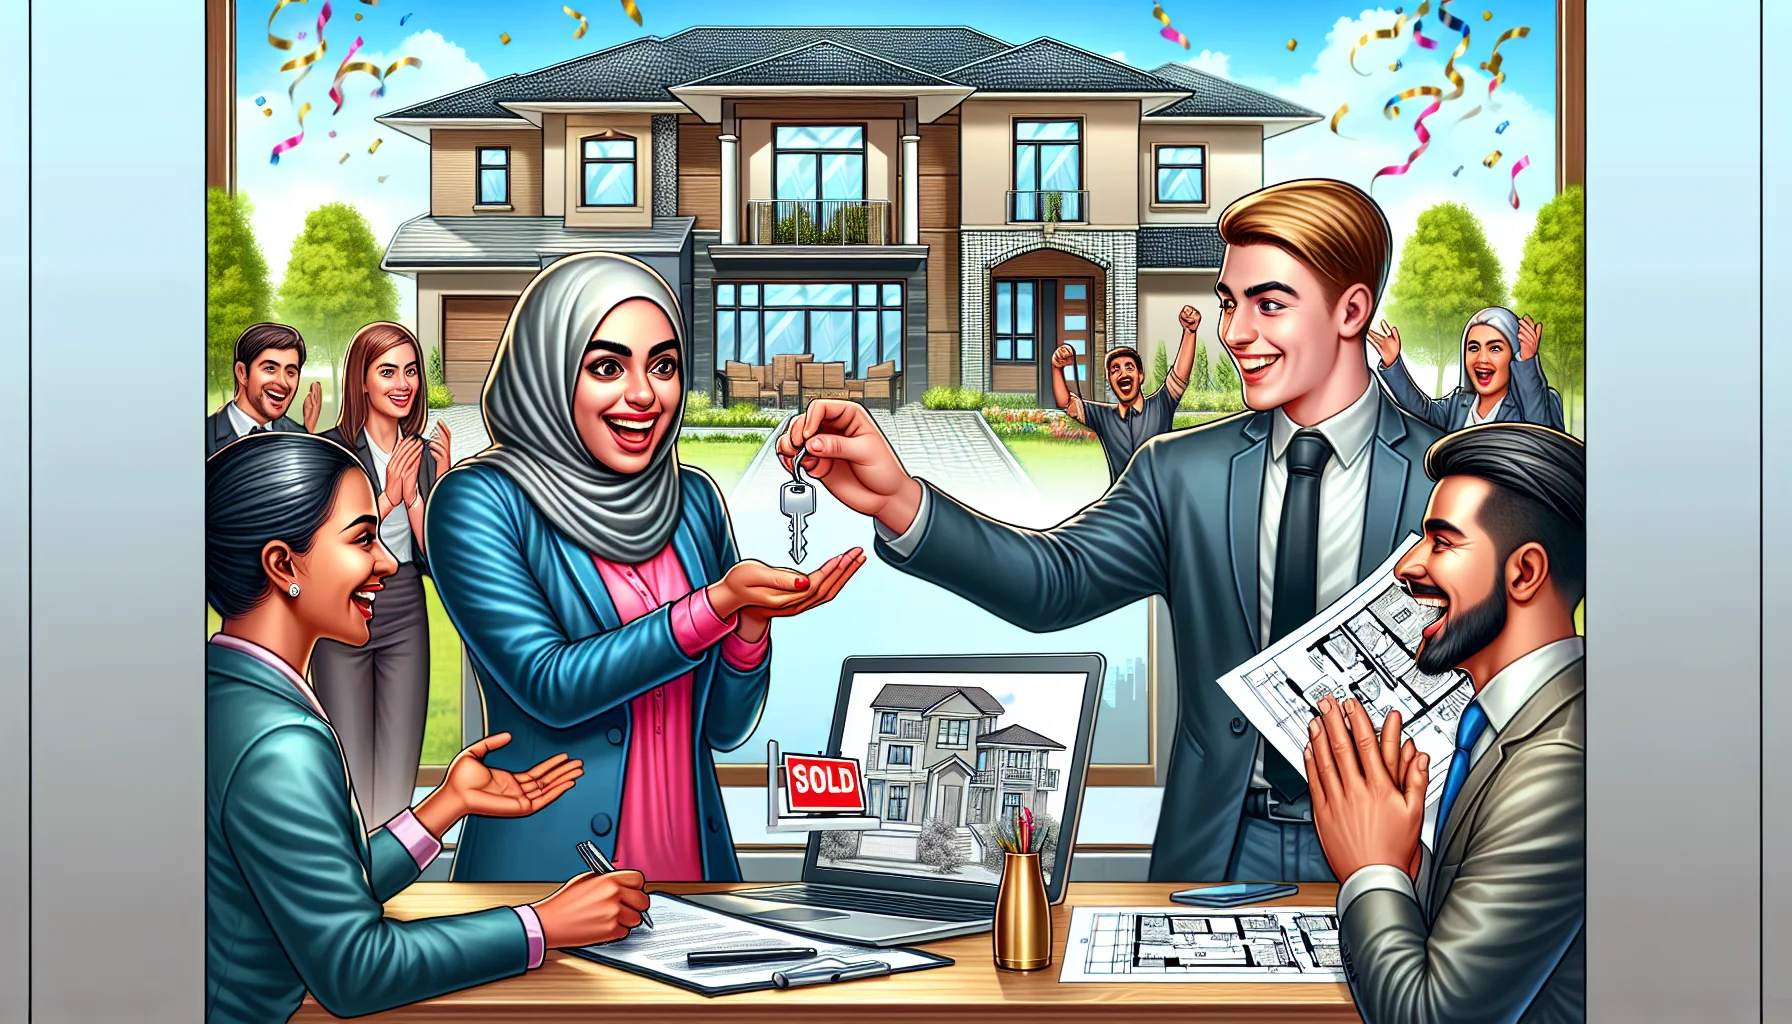 Create an amusing yet realistic depiction of the ideal scenario for buying an investment property. The image shows a bustling real estate office, where a female Middle-Eastern real estate agent with enthusiasm on her face, hands over a shiny key to a happy Caucasian male investor. The background showcases a beautifully constructed property with a 'Sold' sign in the yard. Nearby, a South Asian woman and a Hispanic man, fellow investors, are seen appreciatively studying blueprints of future properties. A positive vibe with everyone smiling and celebratory confetti in the air.